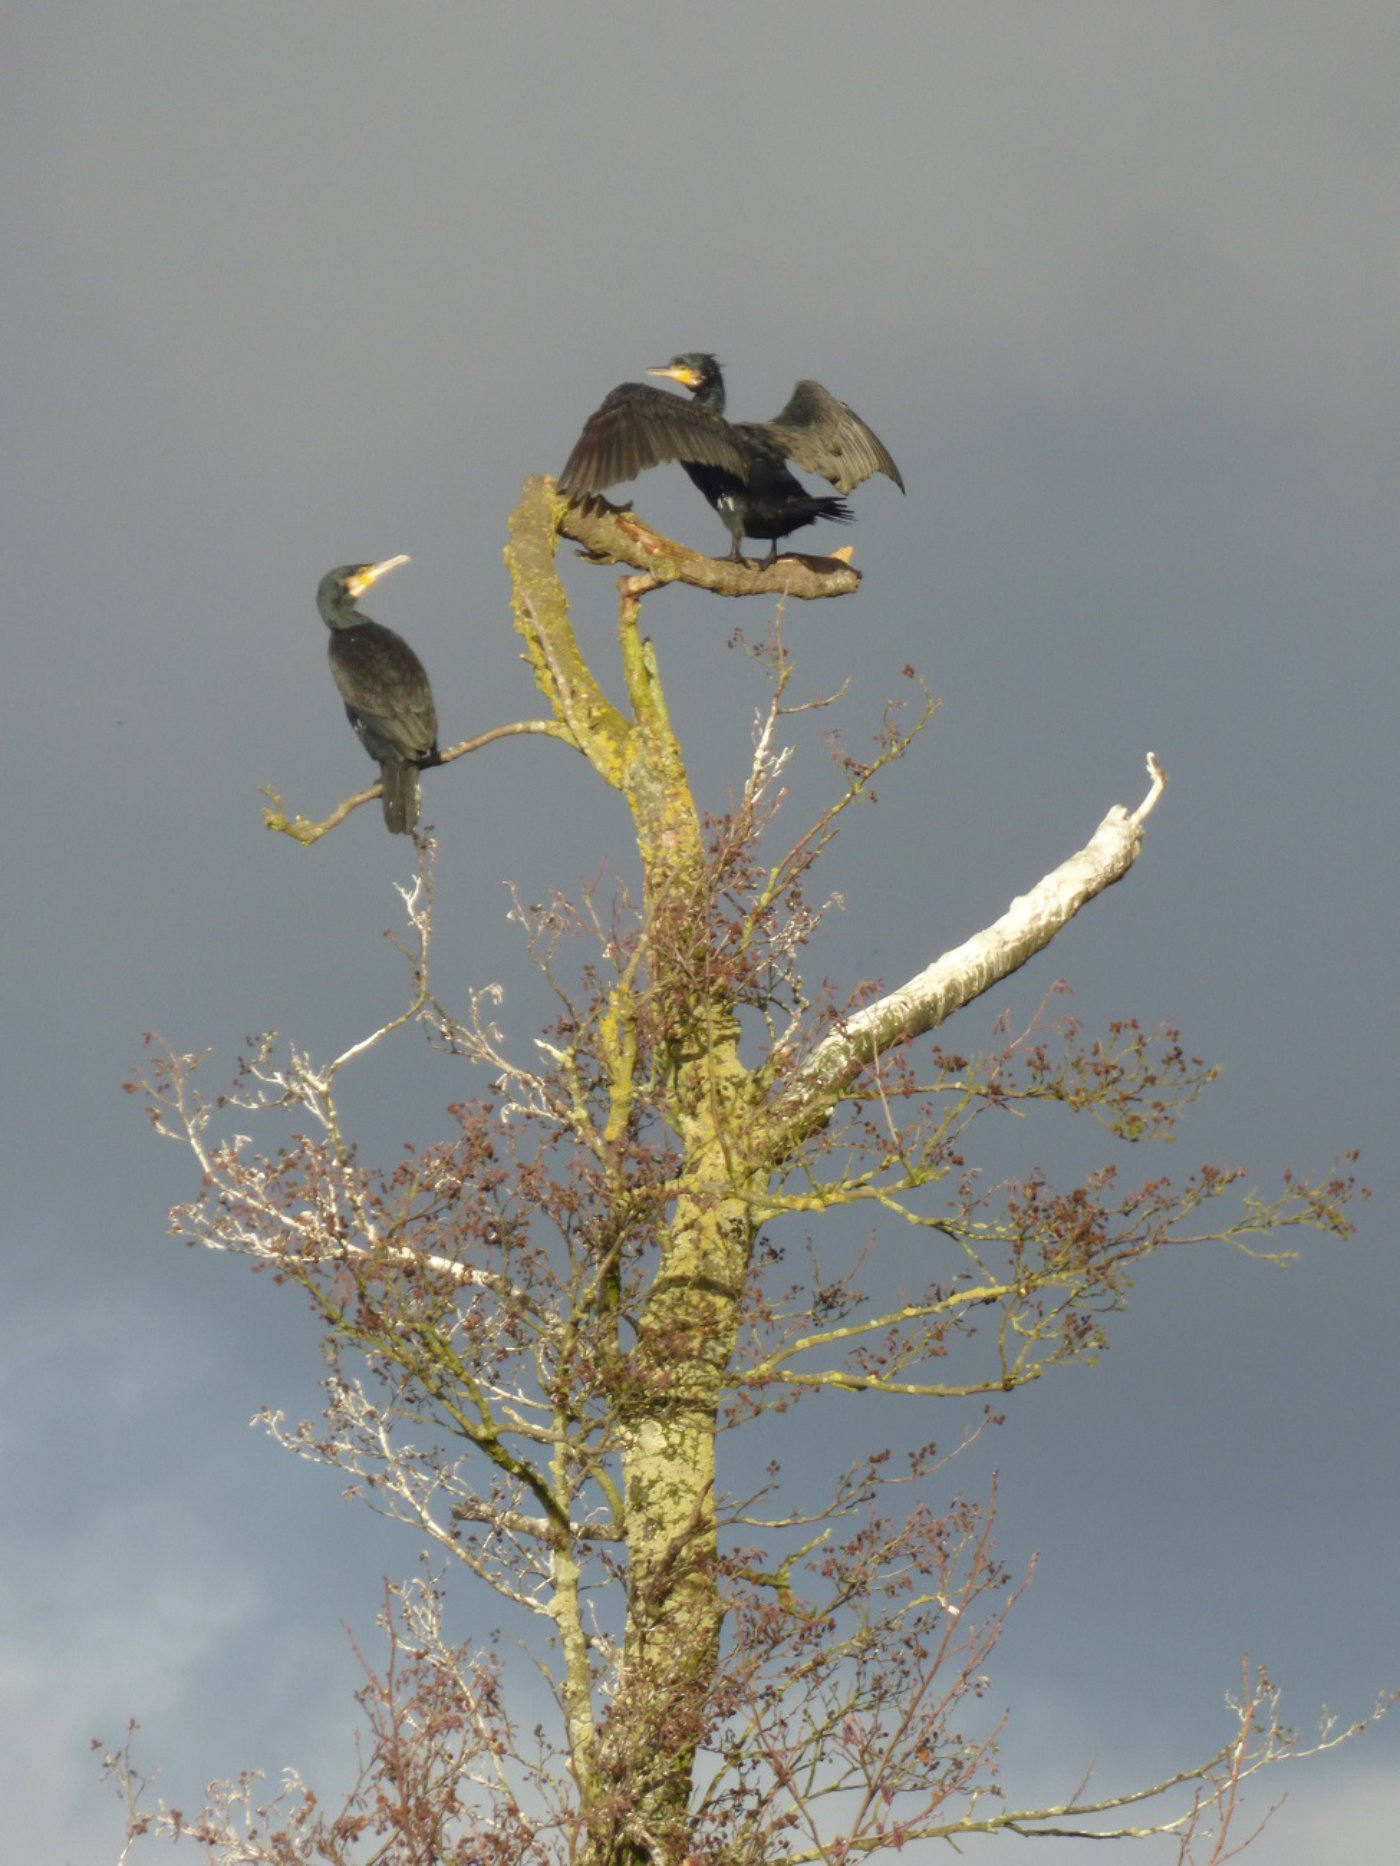 Cormorants looking at each other